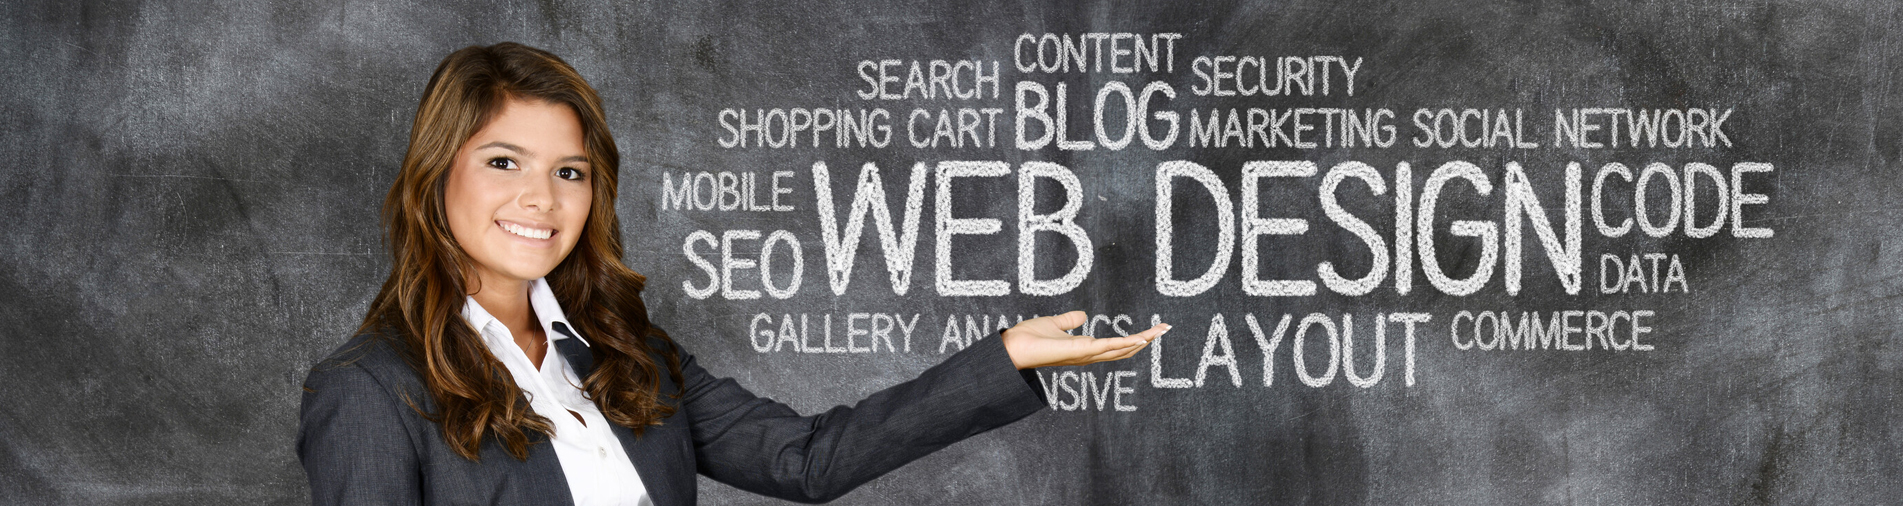 6 Outdated Website and SEO Practices to Avoid